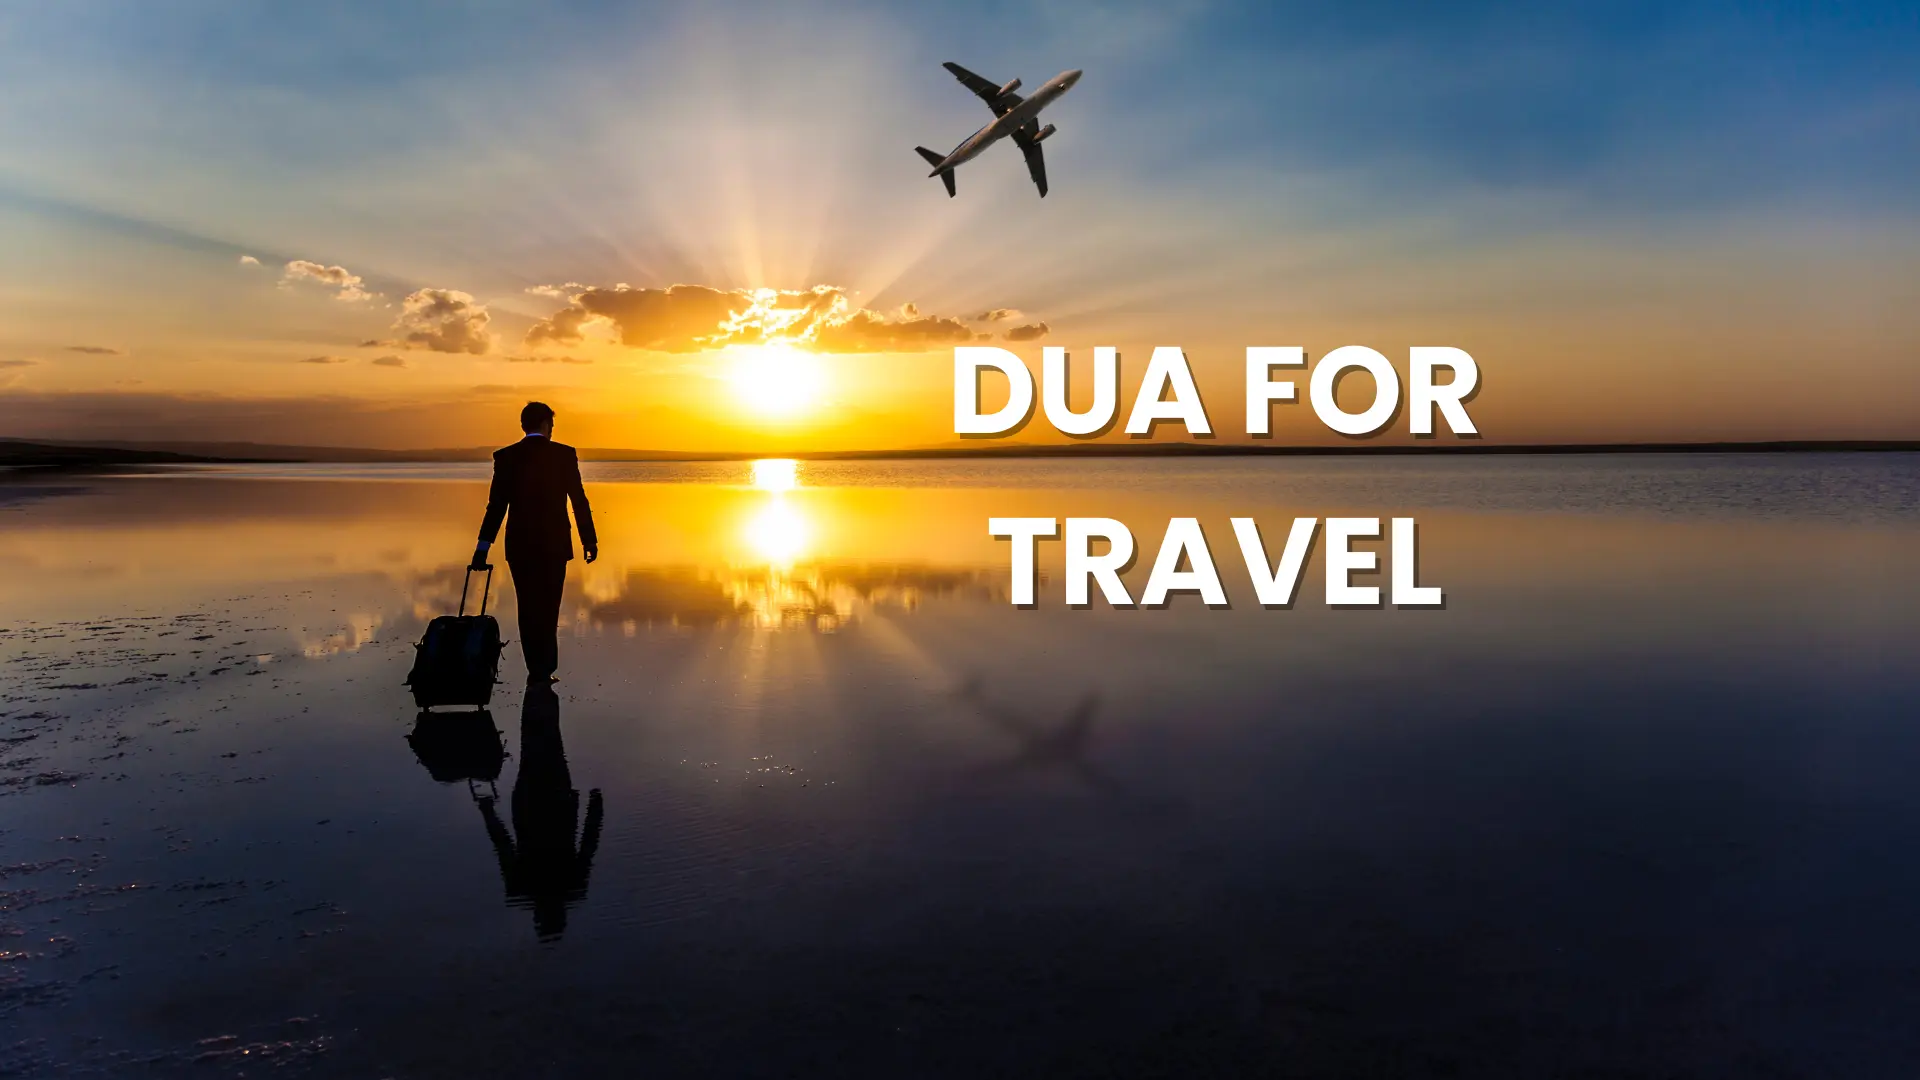 dua for traveling image